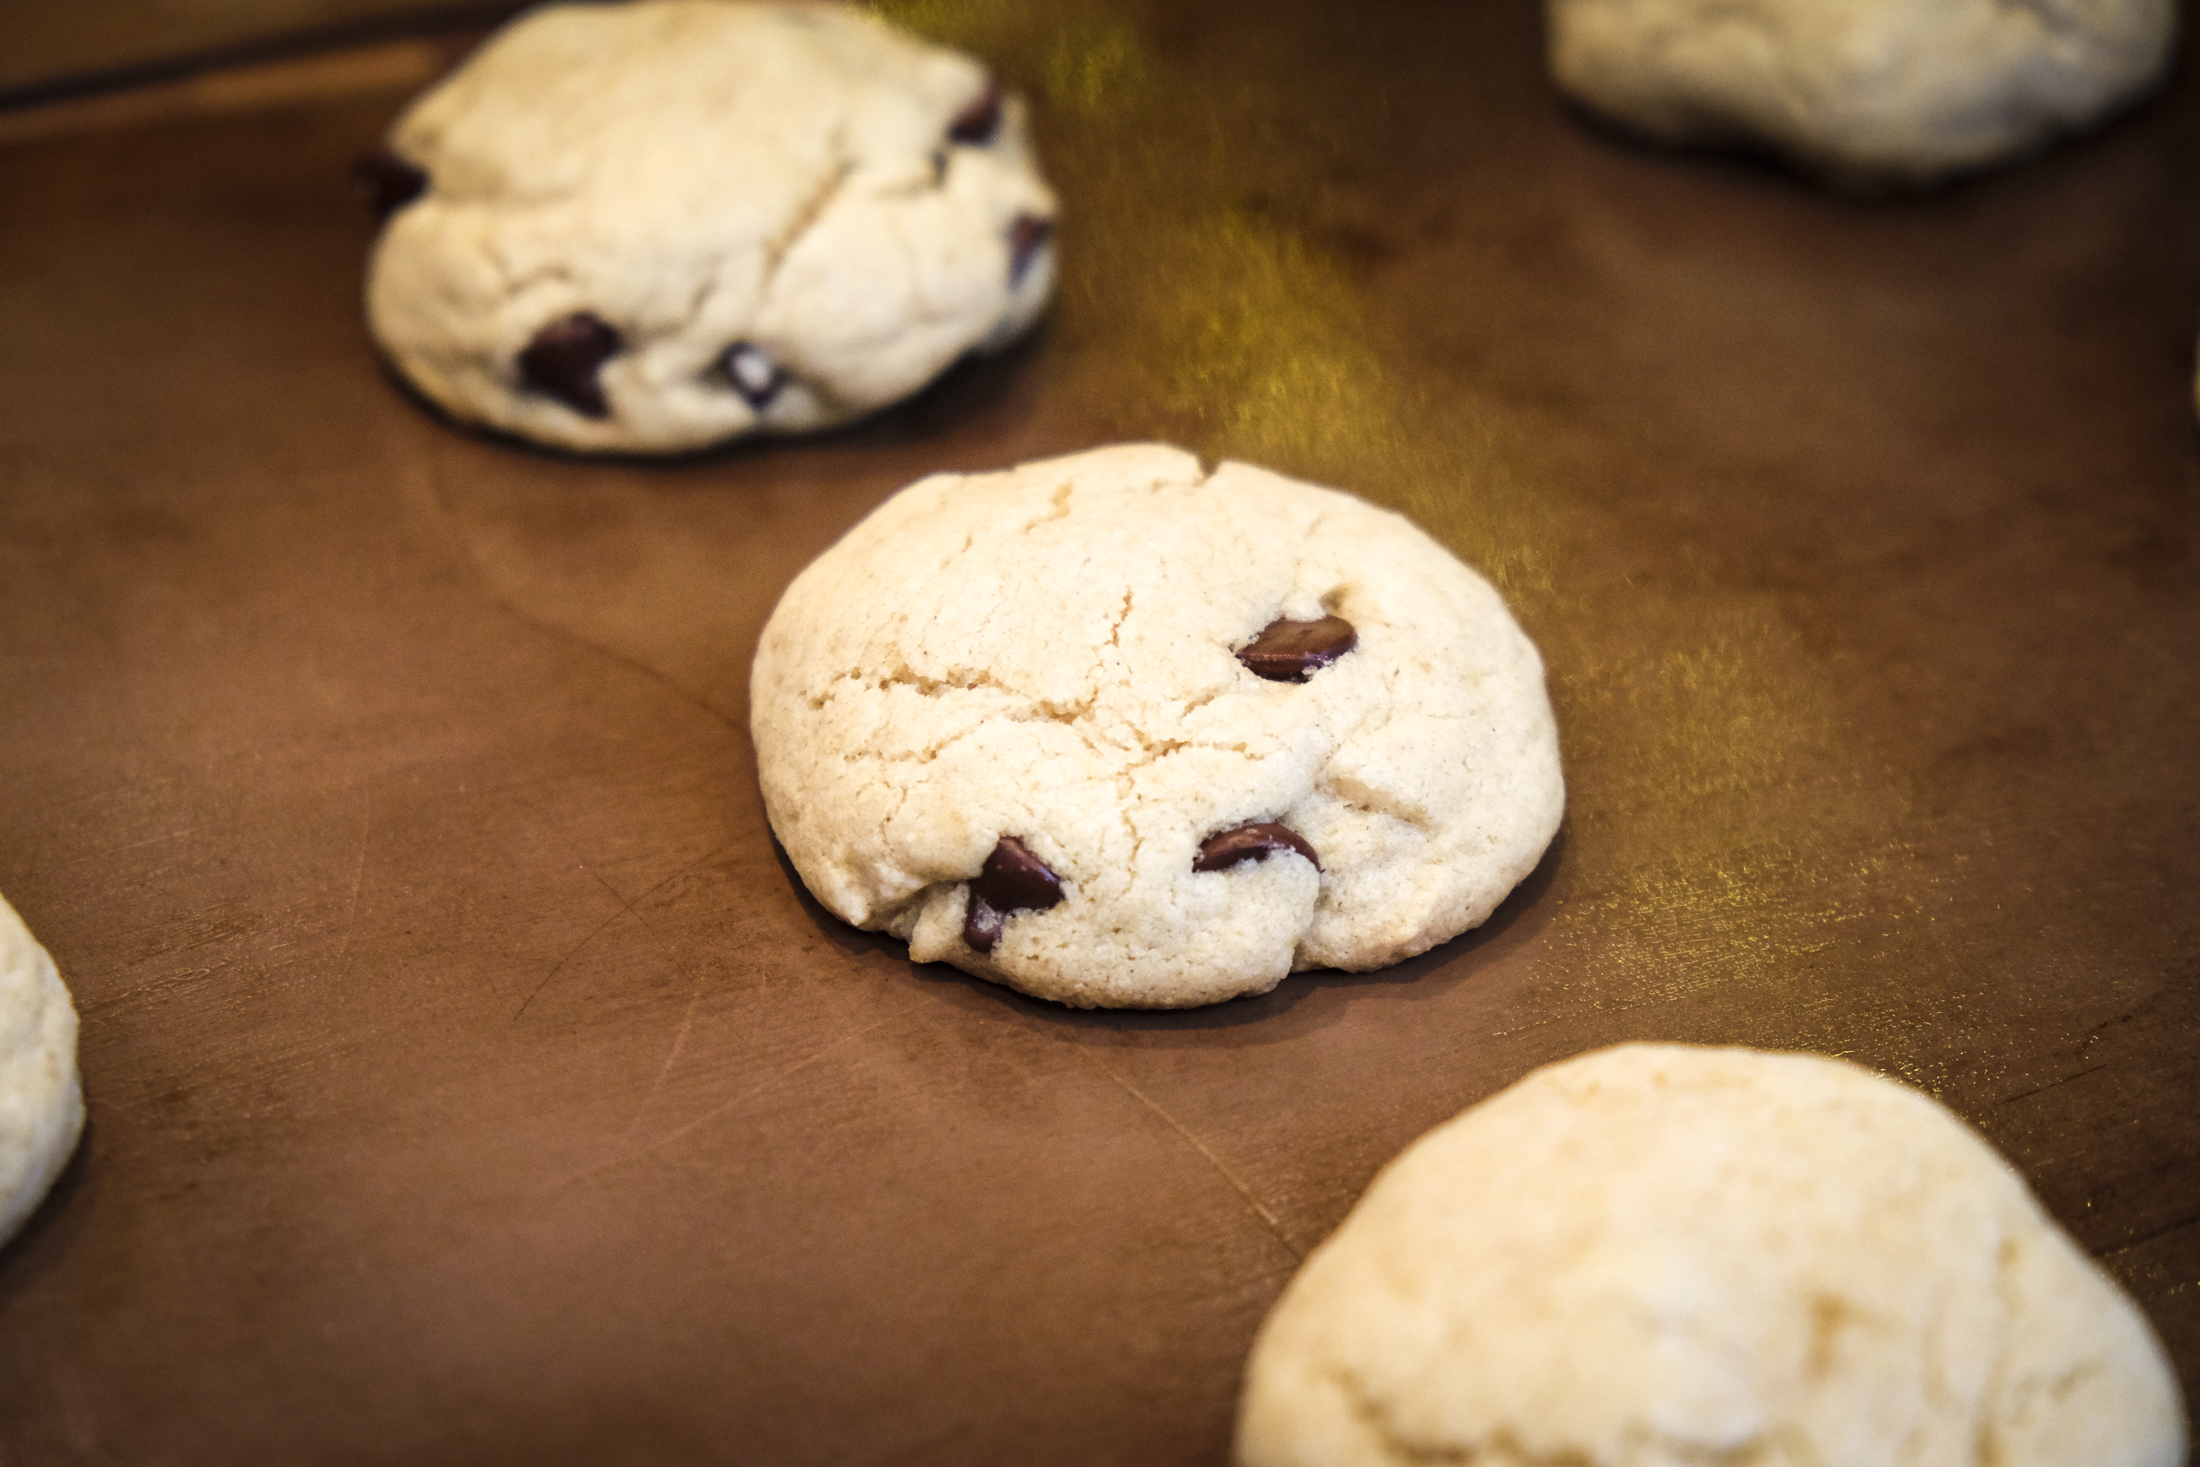 Gluten Free Chocolate Chip Cookies at FoodPractice.com